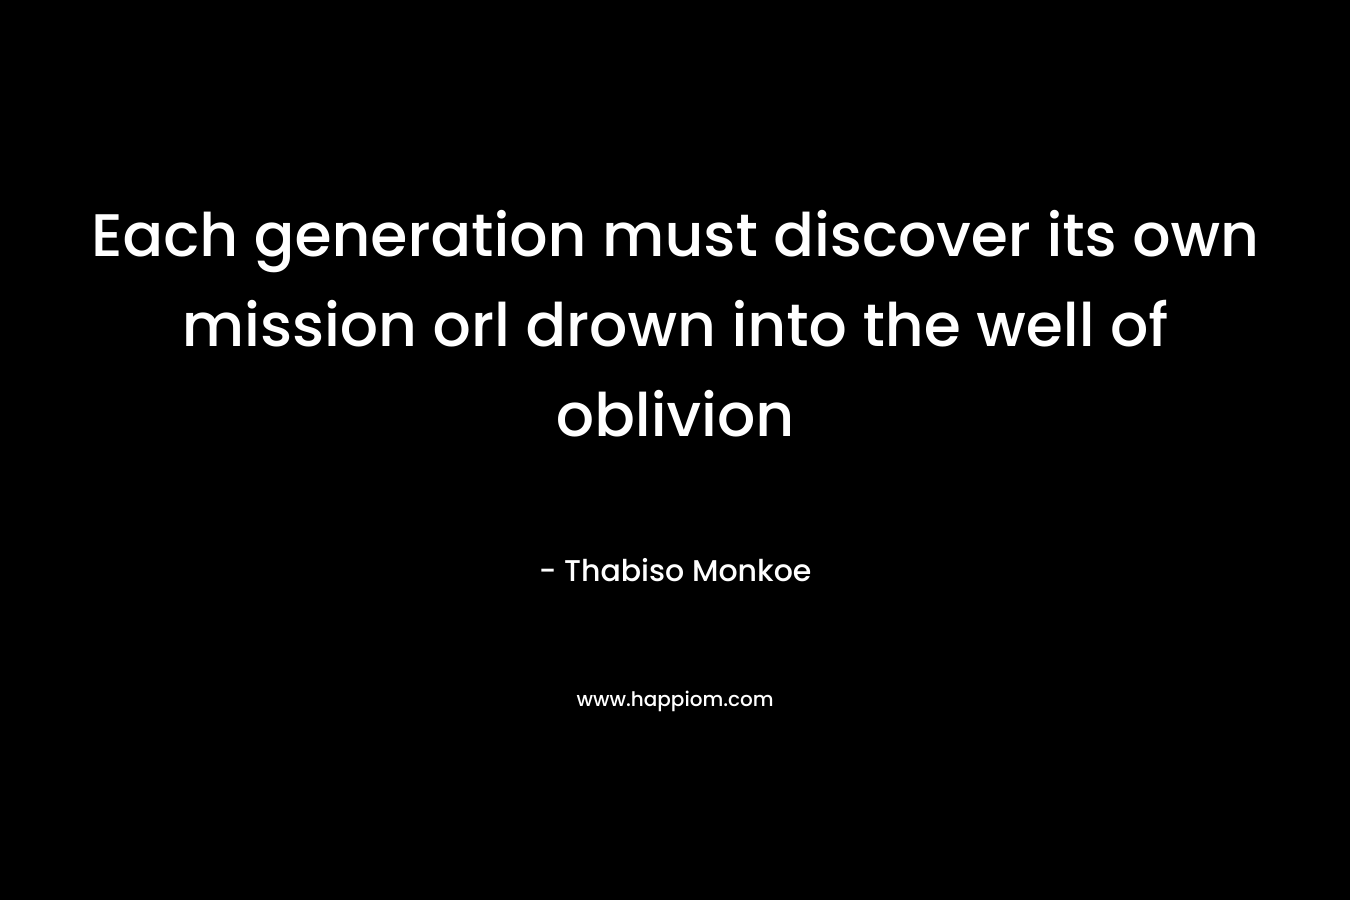 Each generation must discover its own mission orl drown into the well of oblivion